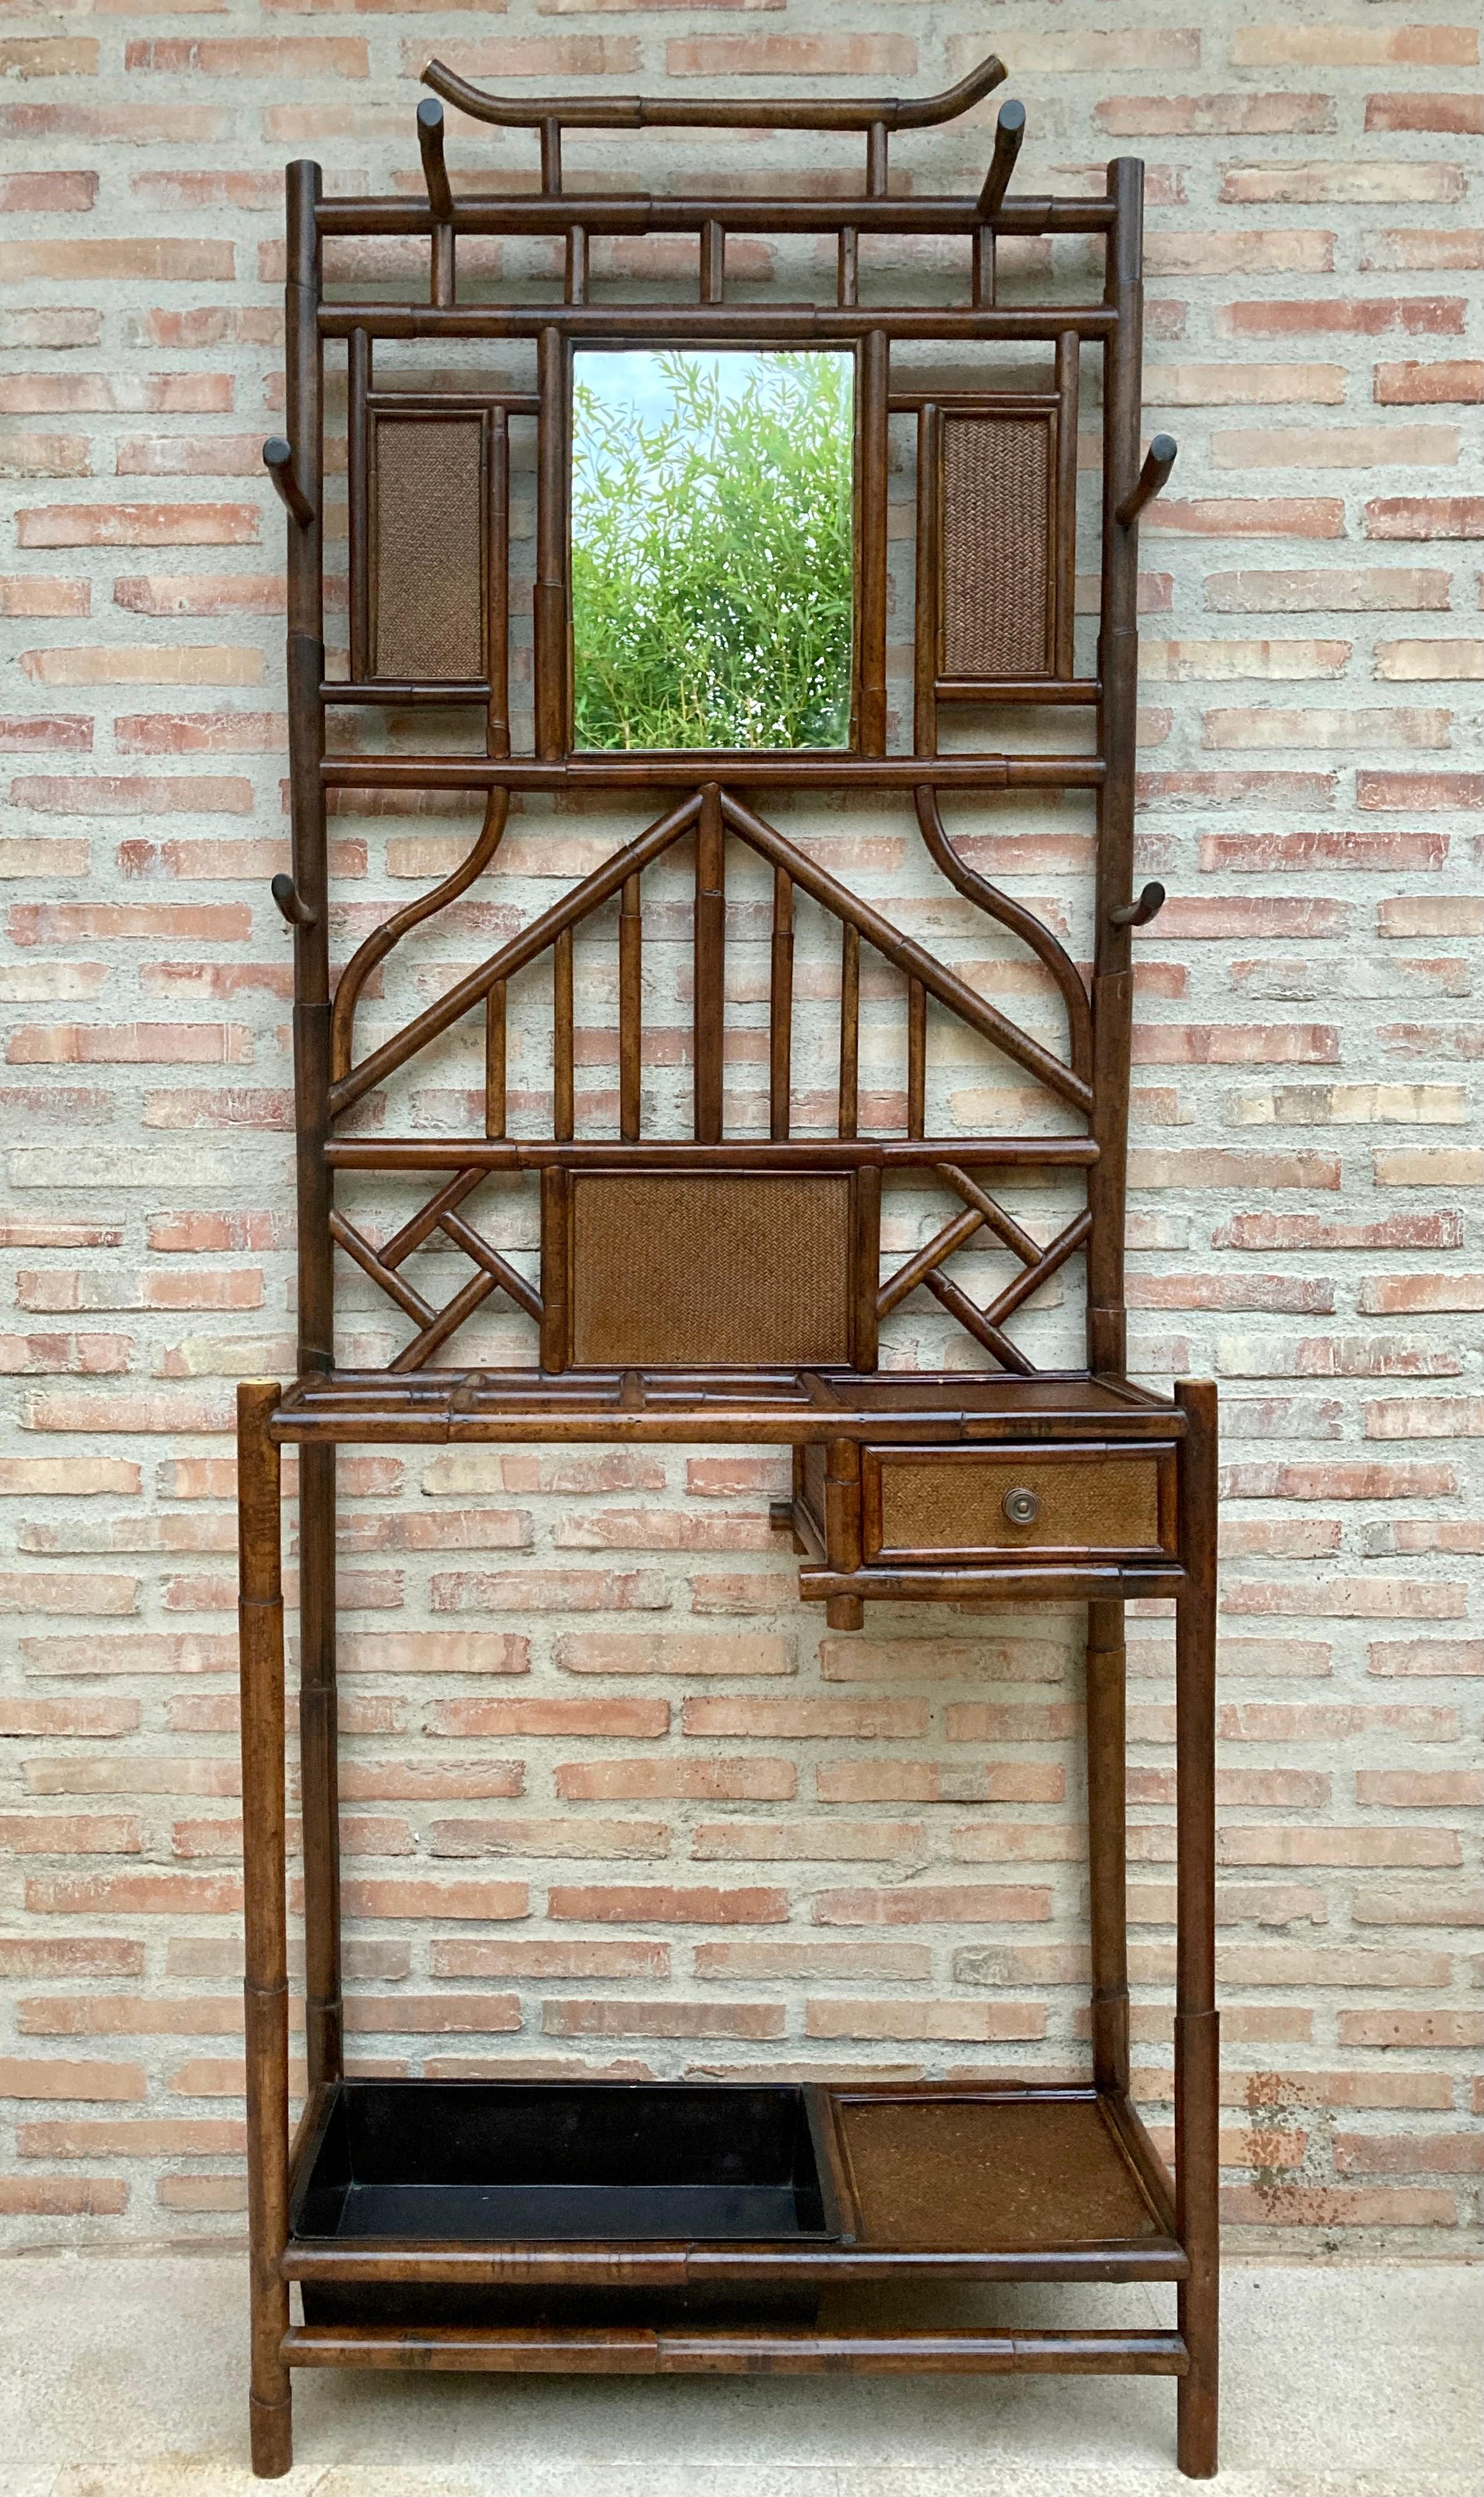 Vintage design
19th century English bamboo hall stand.
Entrance cabinet with umbrella stand, mirror, coat rack and rack
Chippendale style of bamboo and rattan. Very popular in late 19th century England and now trending again.

Exotic and